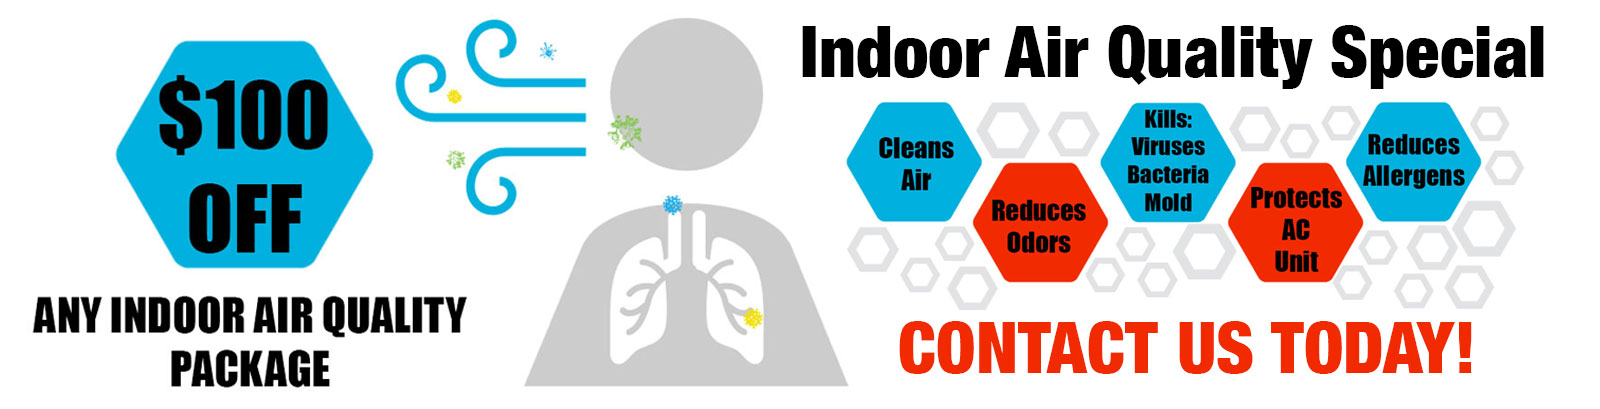 $100 Off Any Indoor Air Quality Package